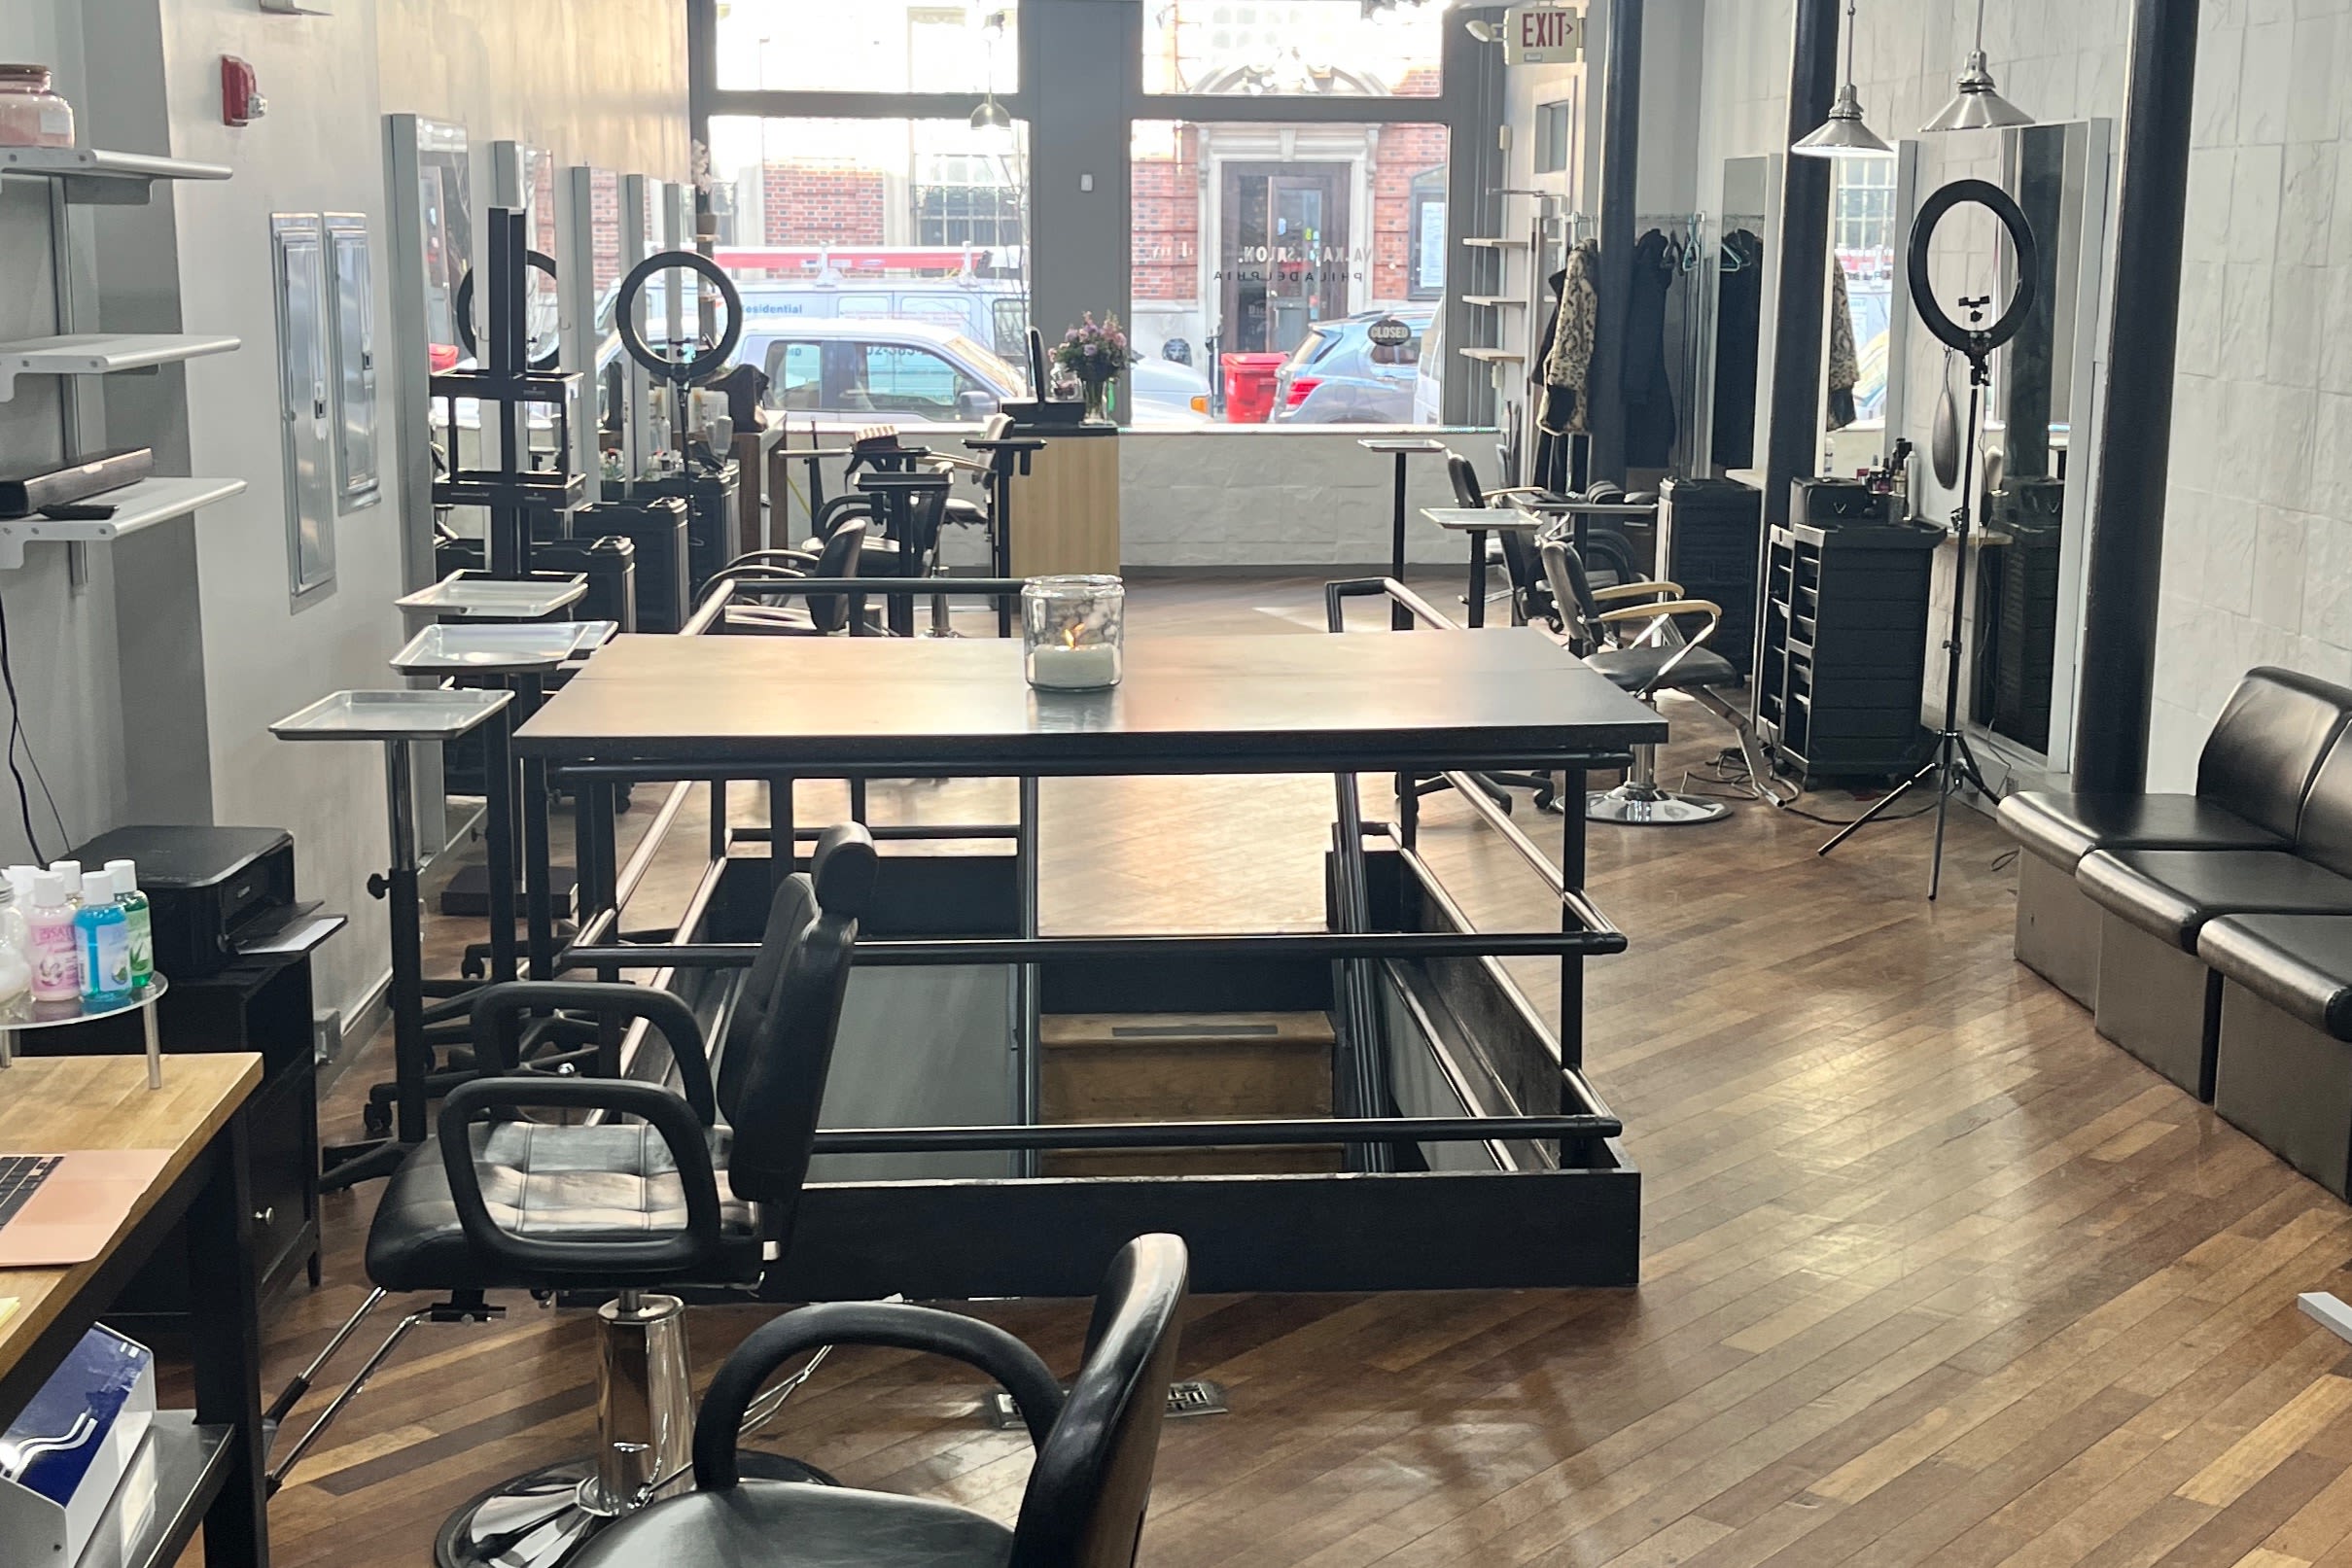 The Ava Karl Salon: Read Reviews and Book Classes on ClassPass